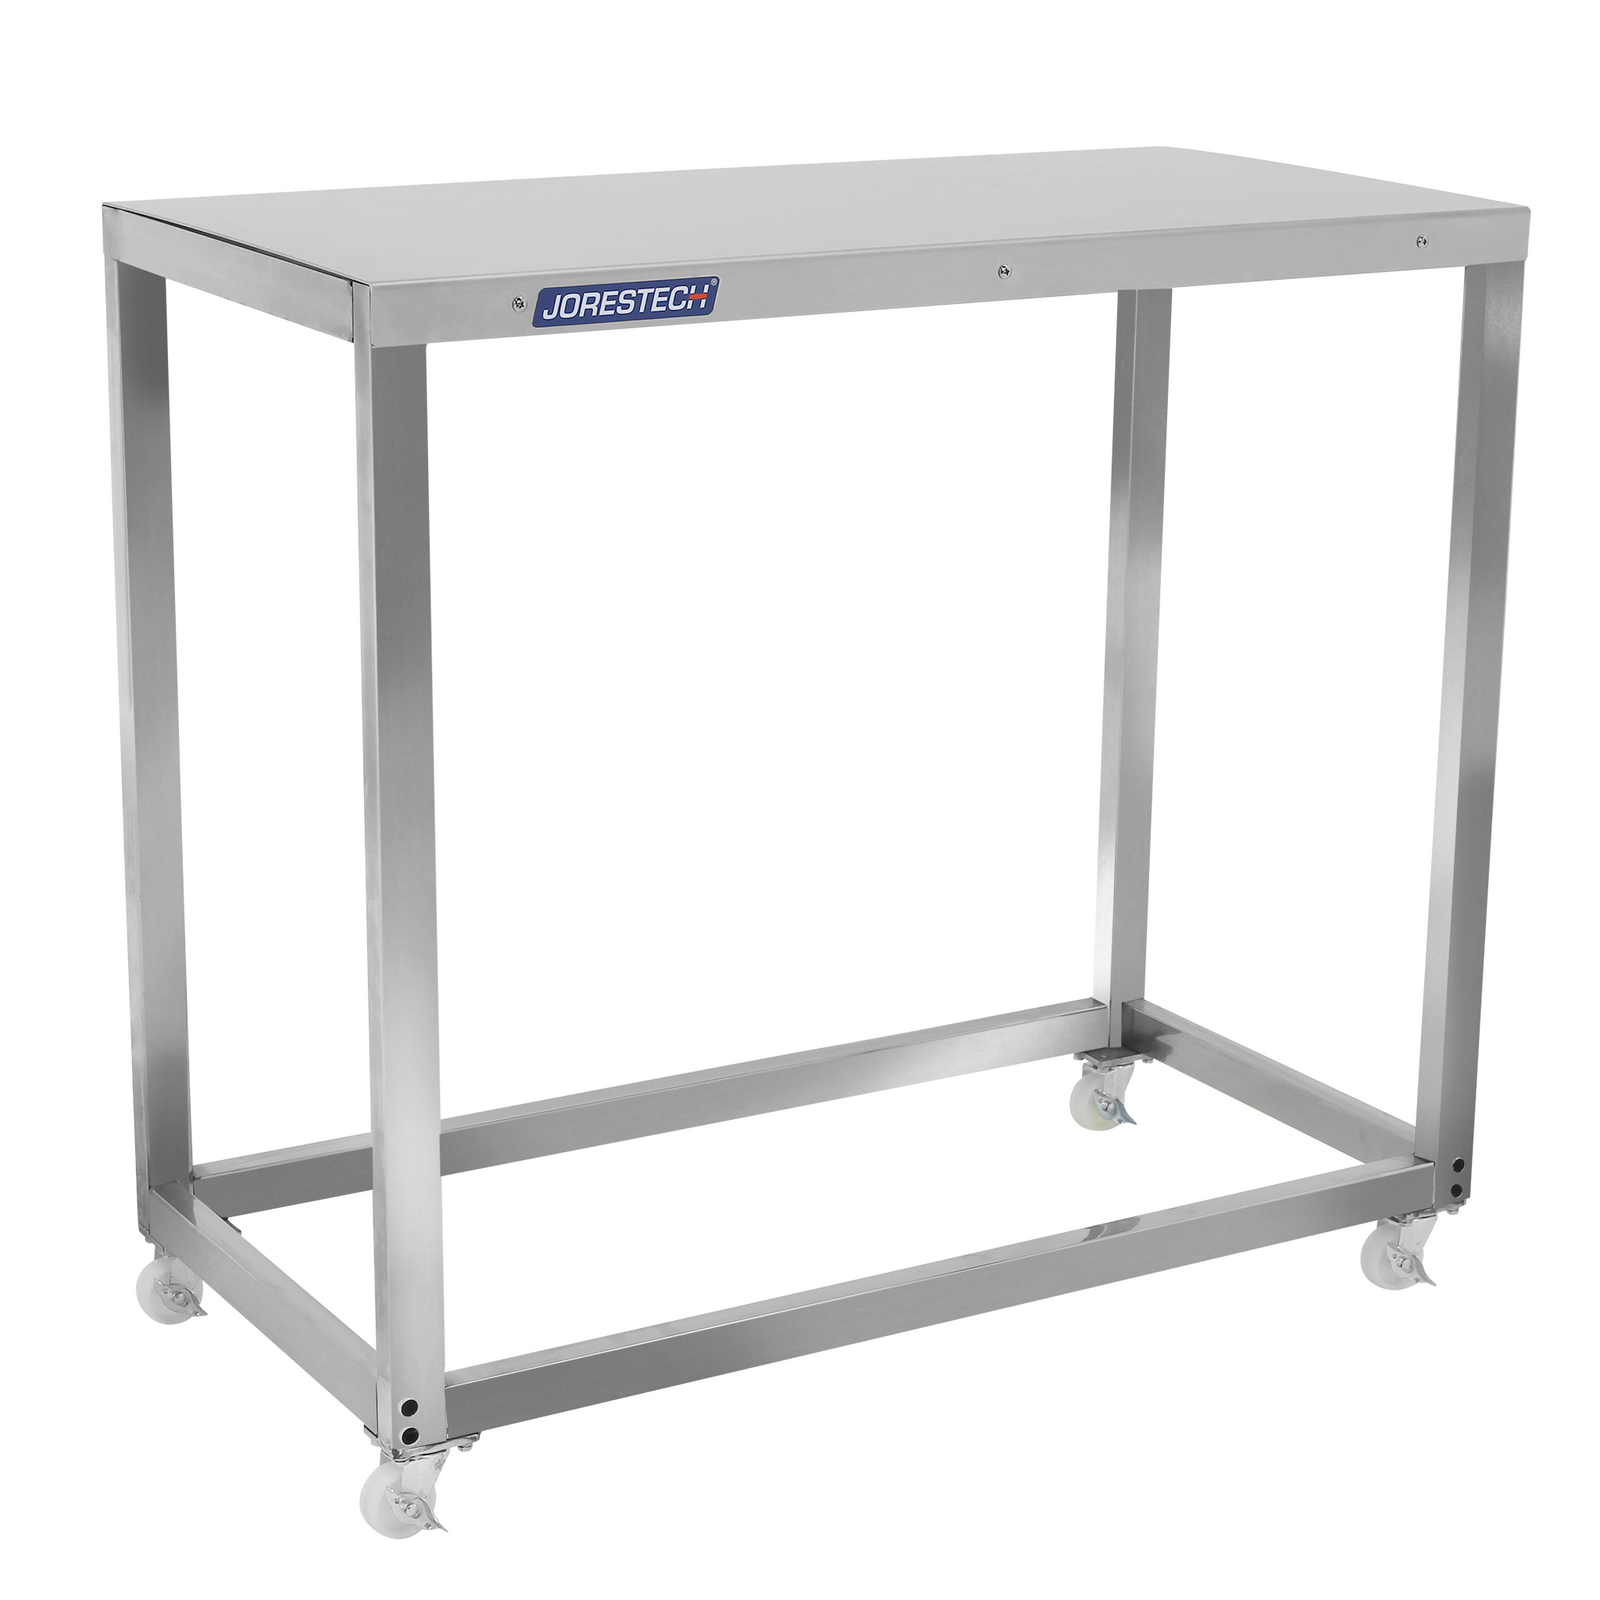 Stainless steel prep work table with wheels